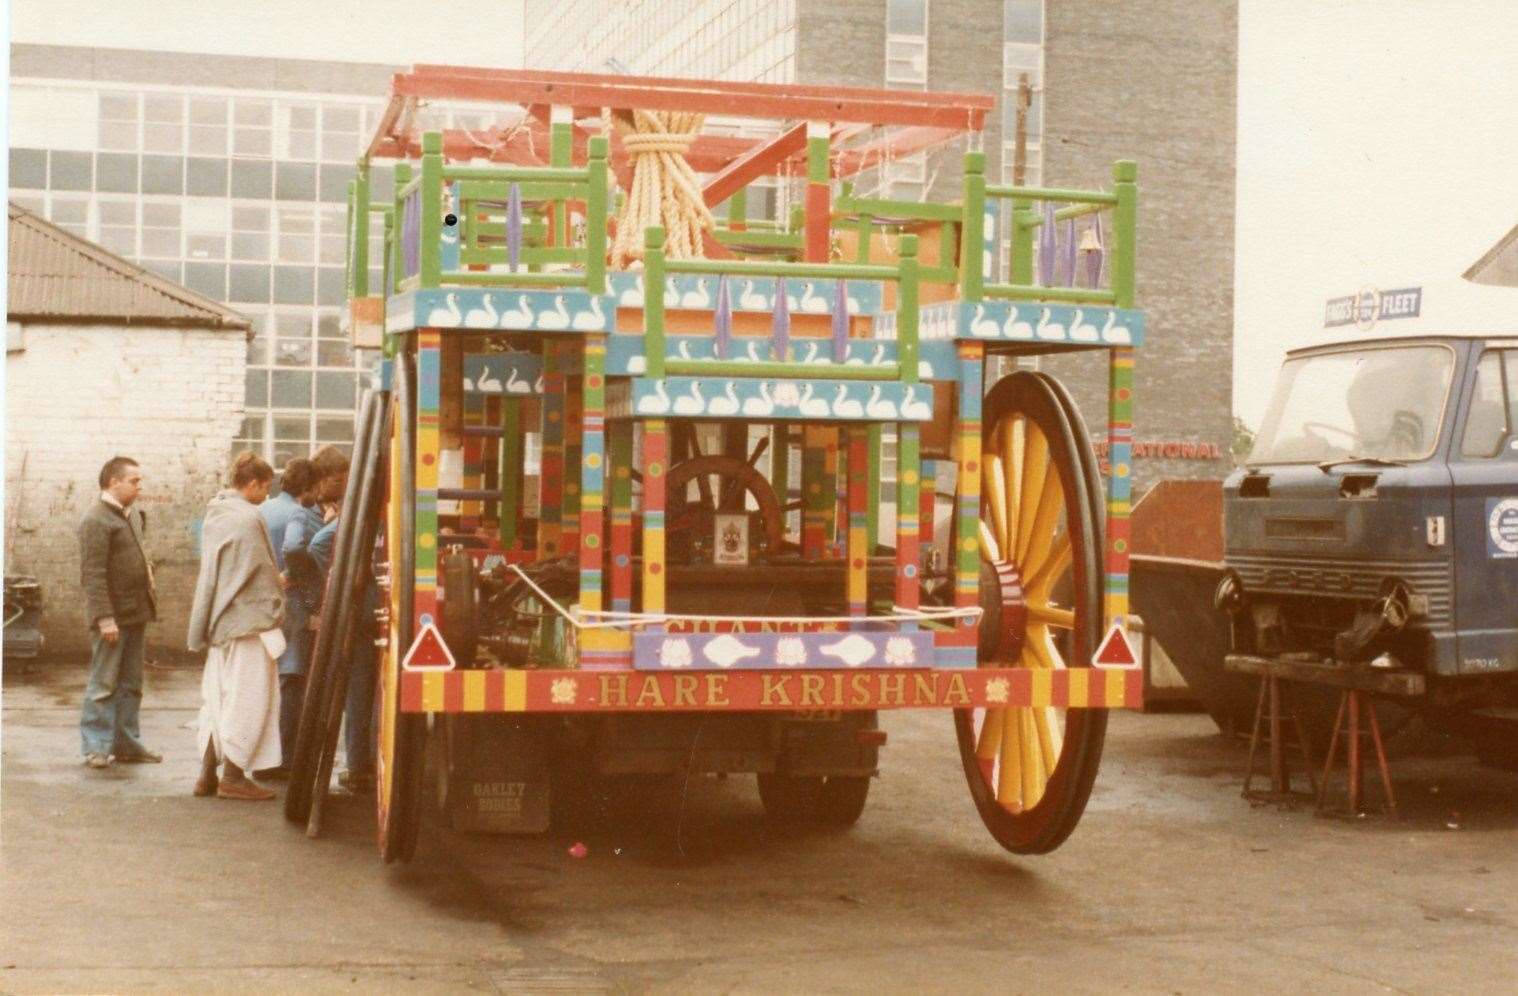 The religious group, the Hare Krishnas, came to Ashford for the commission of a giant mobile temple known as a Ratha. Mr Knowles particularly remembers its seven-foot-tall wheels